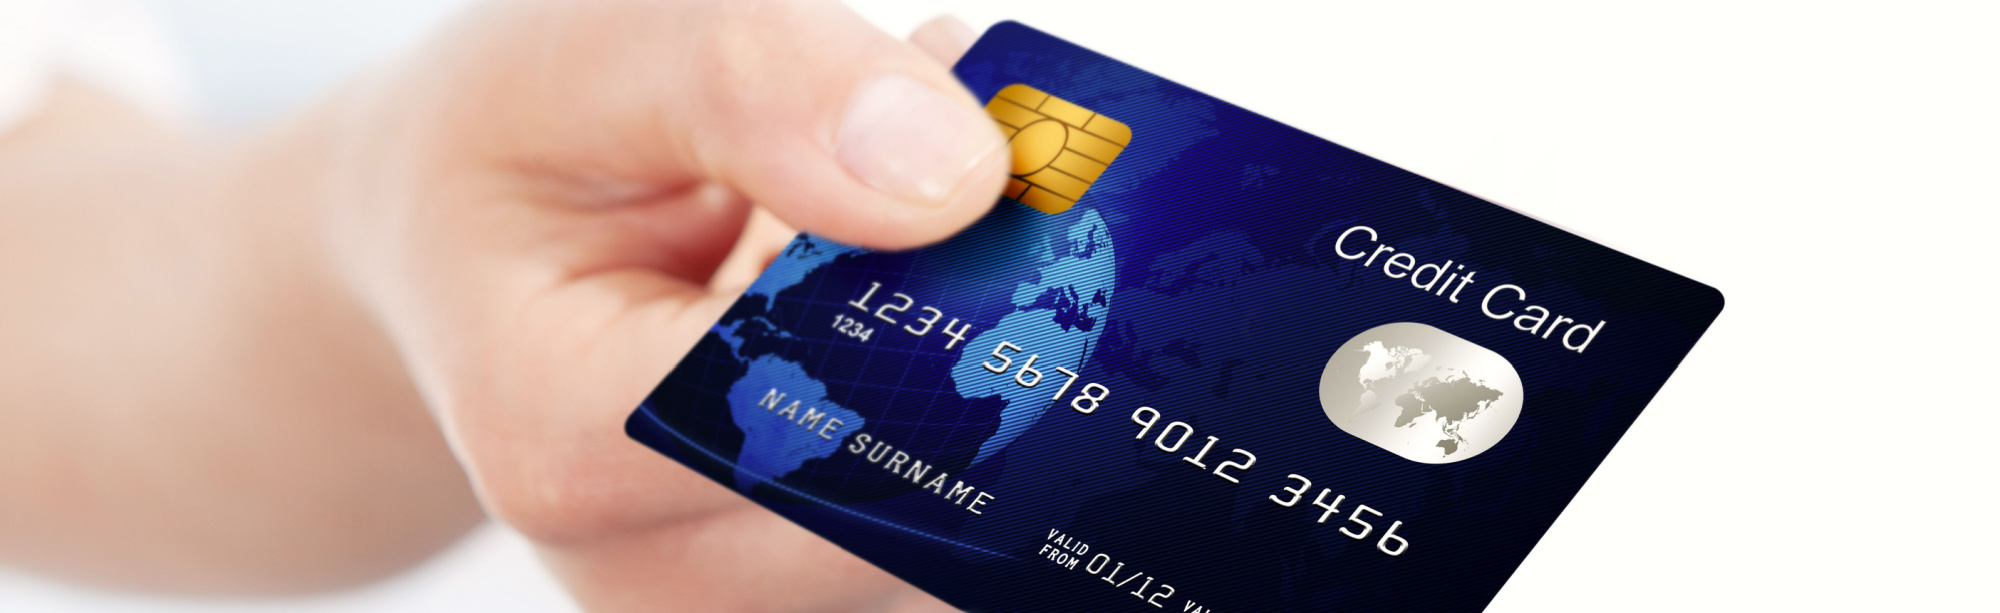 image of benefits of accepting credit card payments